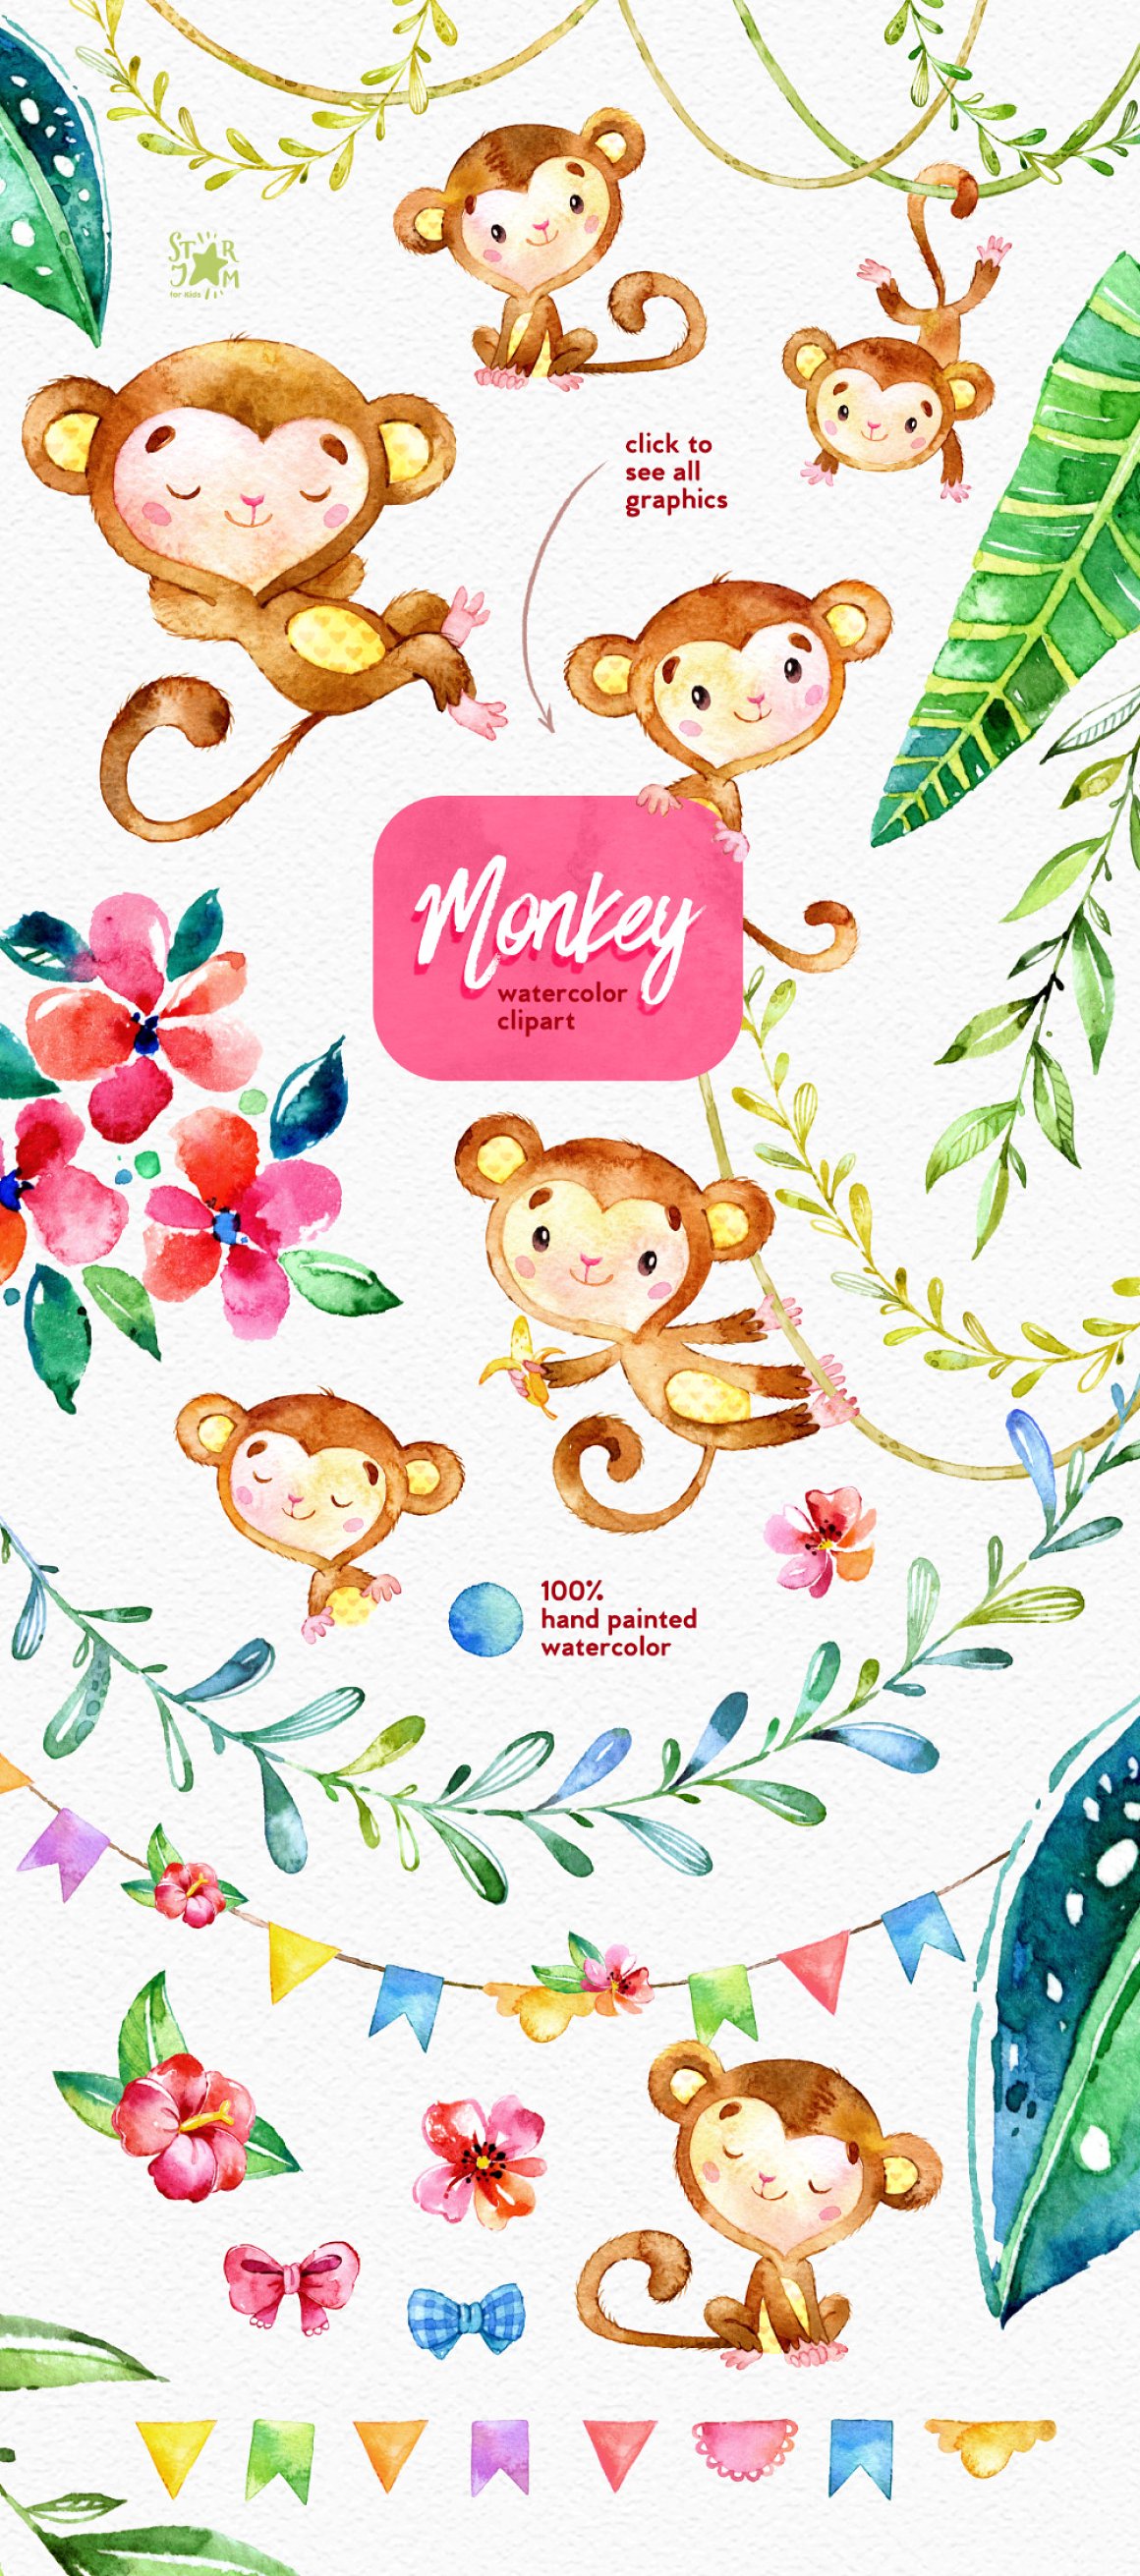 So bright and colorful monkey illustration.